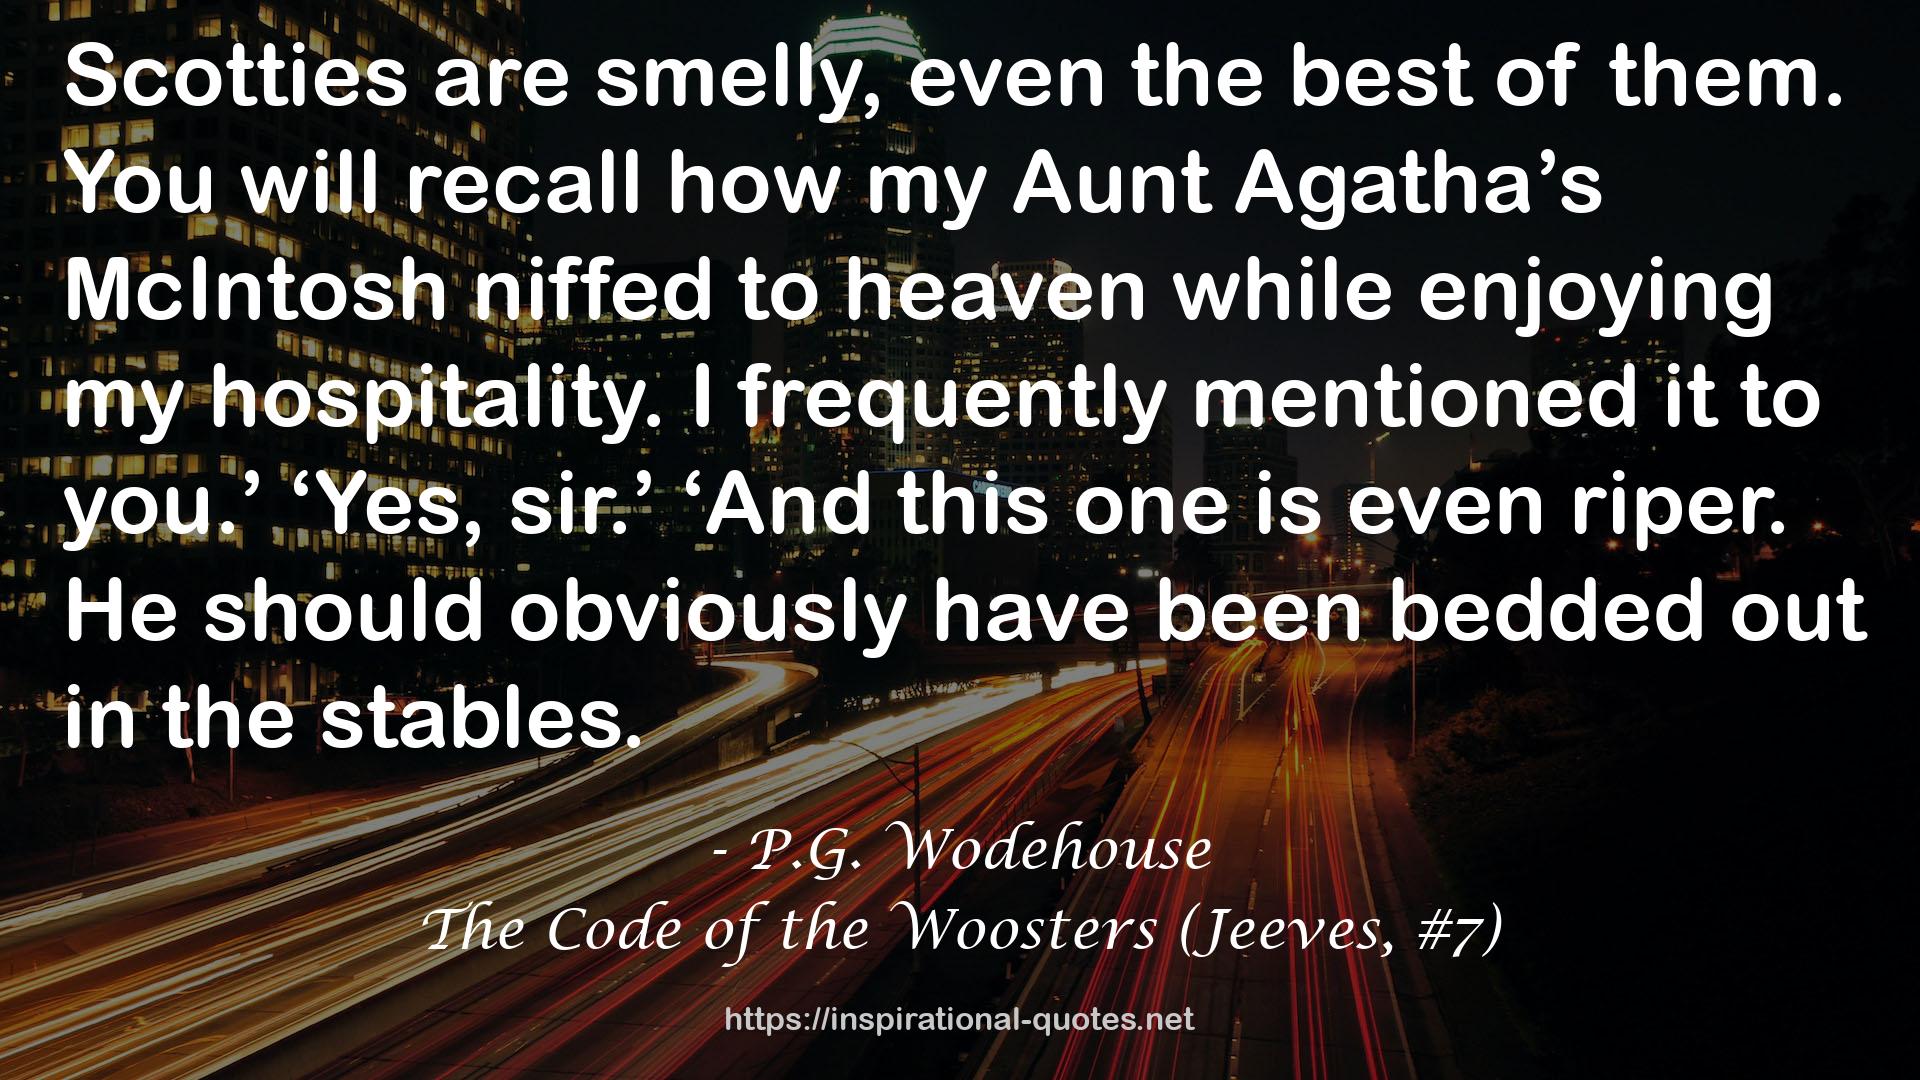 The Code of the Woosters (Jeeves, #7) QUOTES